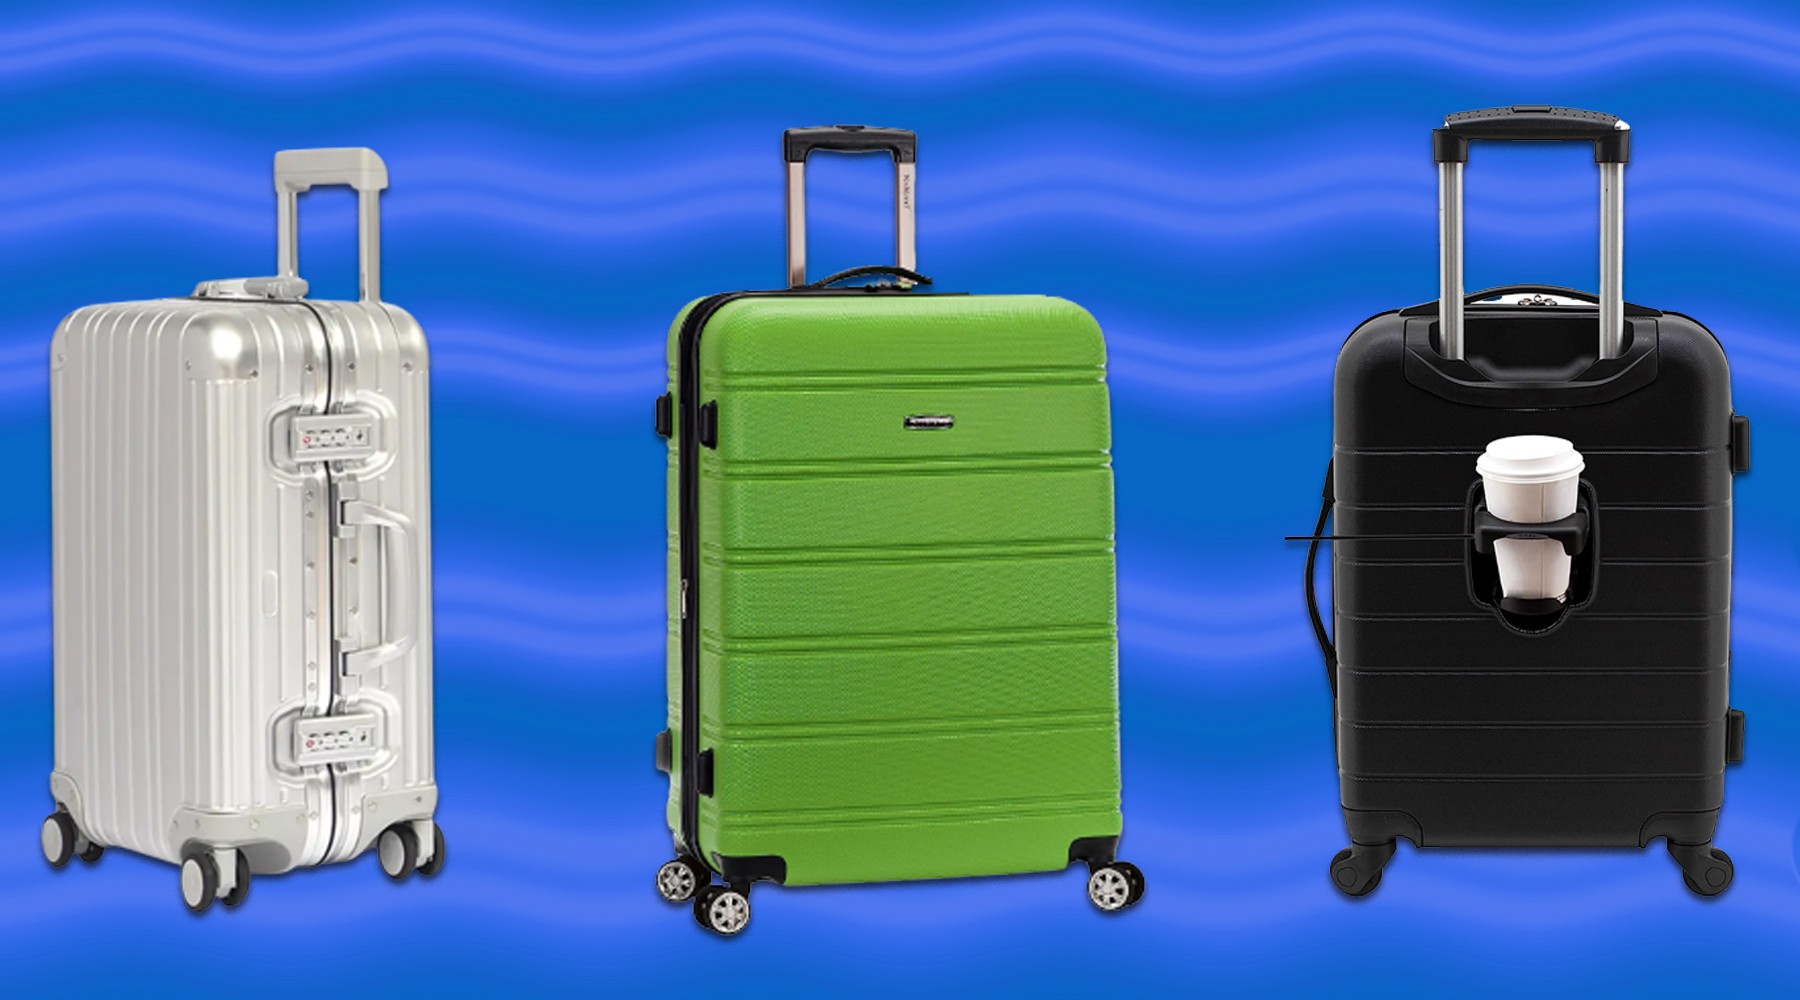 https://video-images.vice.com/articles/64ca883ae31cd85c12c49606/lede/1690999949189-the-best-affordable-luggage.jpeg?crop=0.5555555555555556xw:1xh;center,center